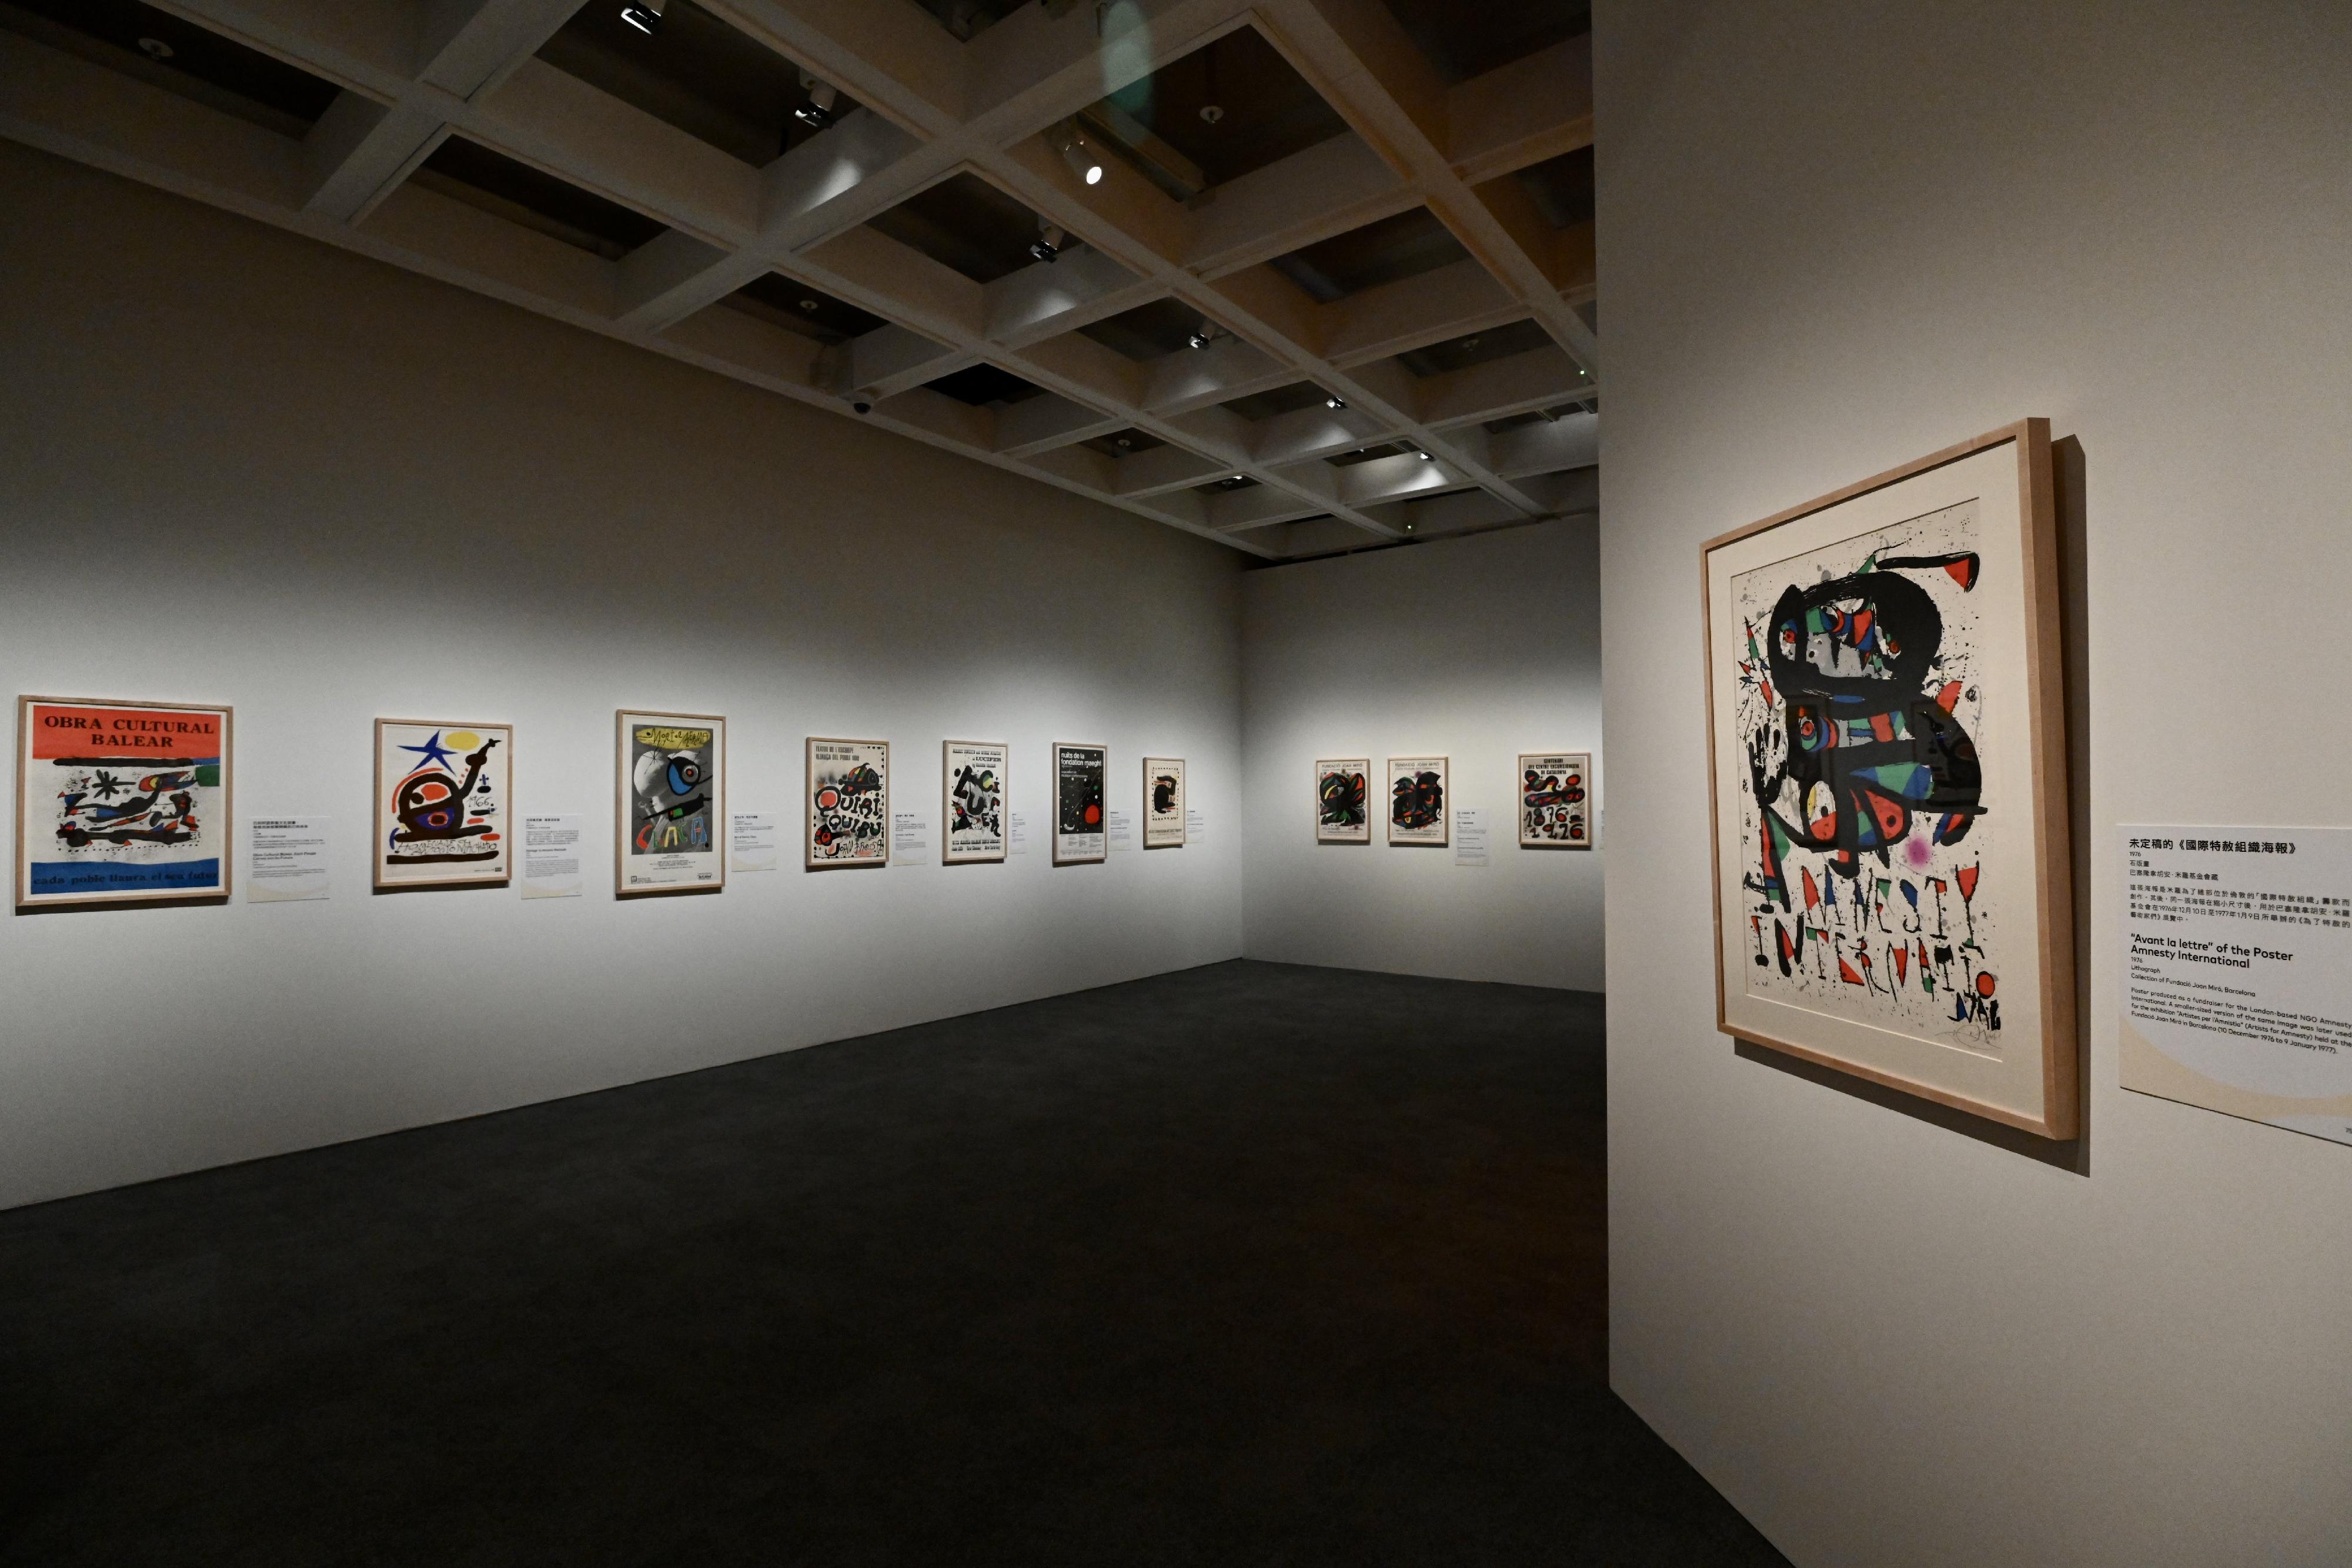 "The Hong Kong Jockey Club Series: Joan Miró — The Poetry of Everyday Life" exhibition will be held at the Hong Kong Museum of Art starting from tomorrow (March 3). Picture shows the museum section featuring Miró's "Poster Art".